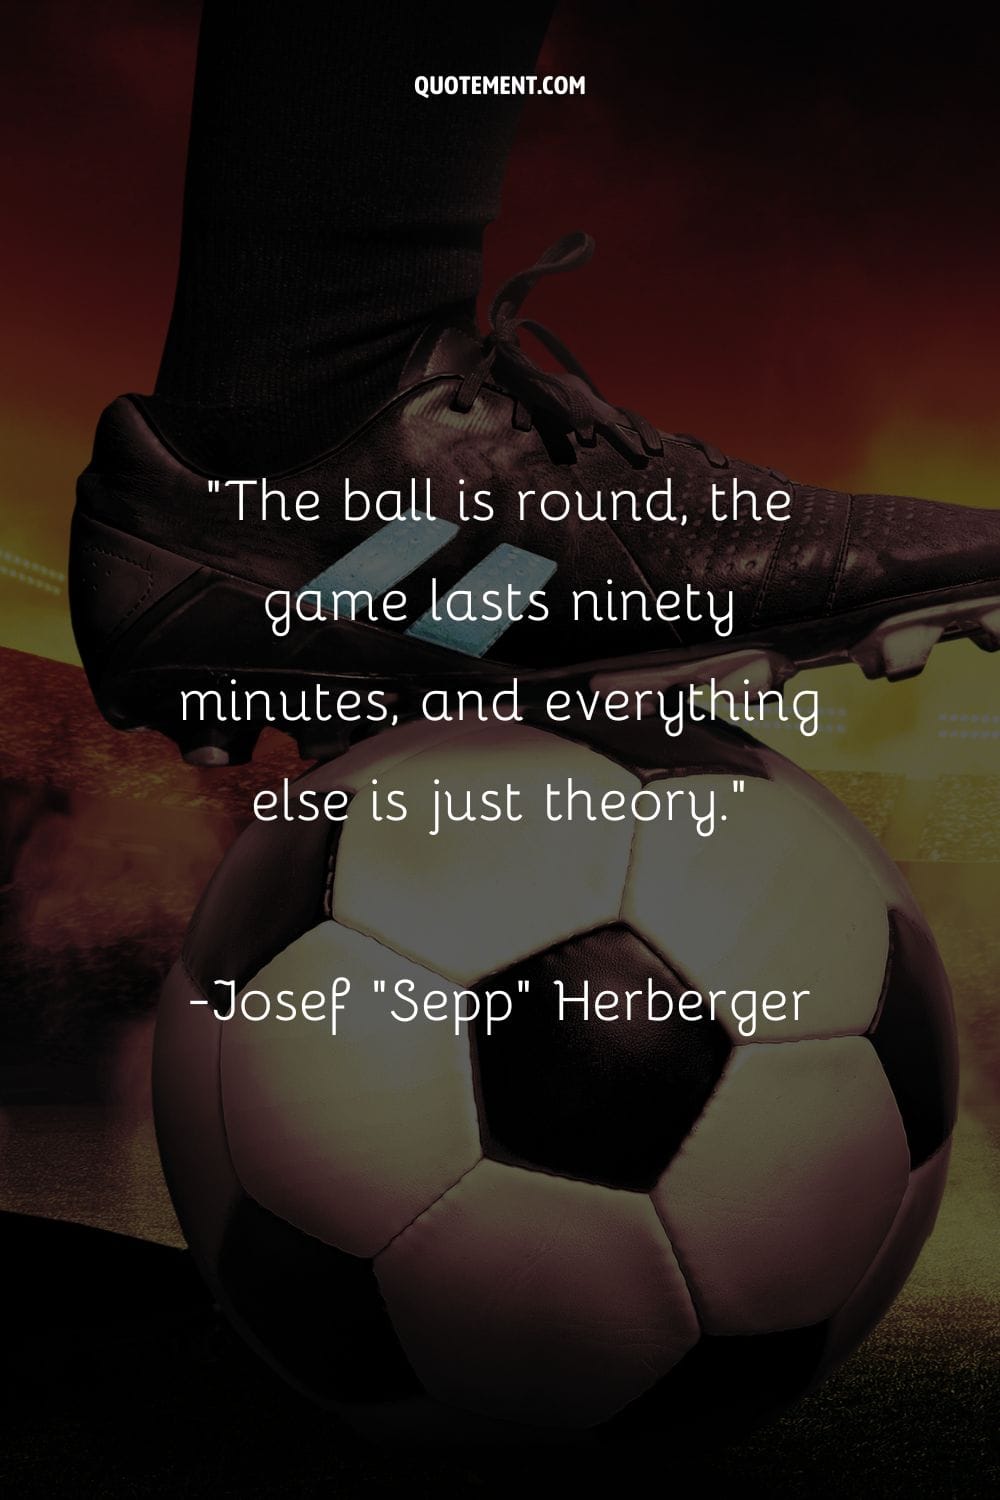 a soccer player's foot on the ball representing most famous soccer quote